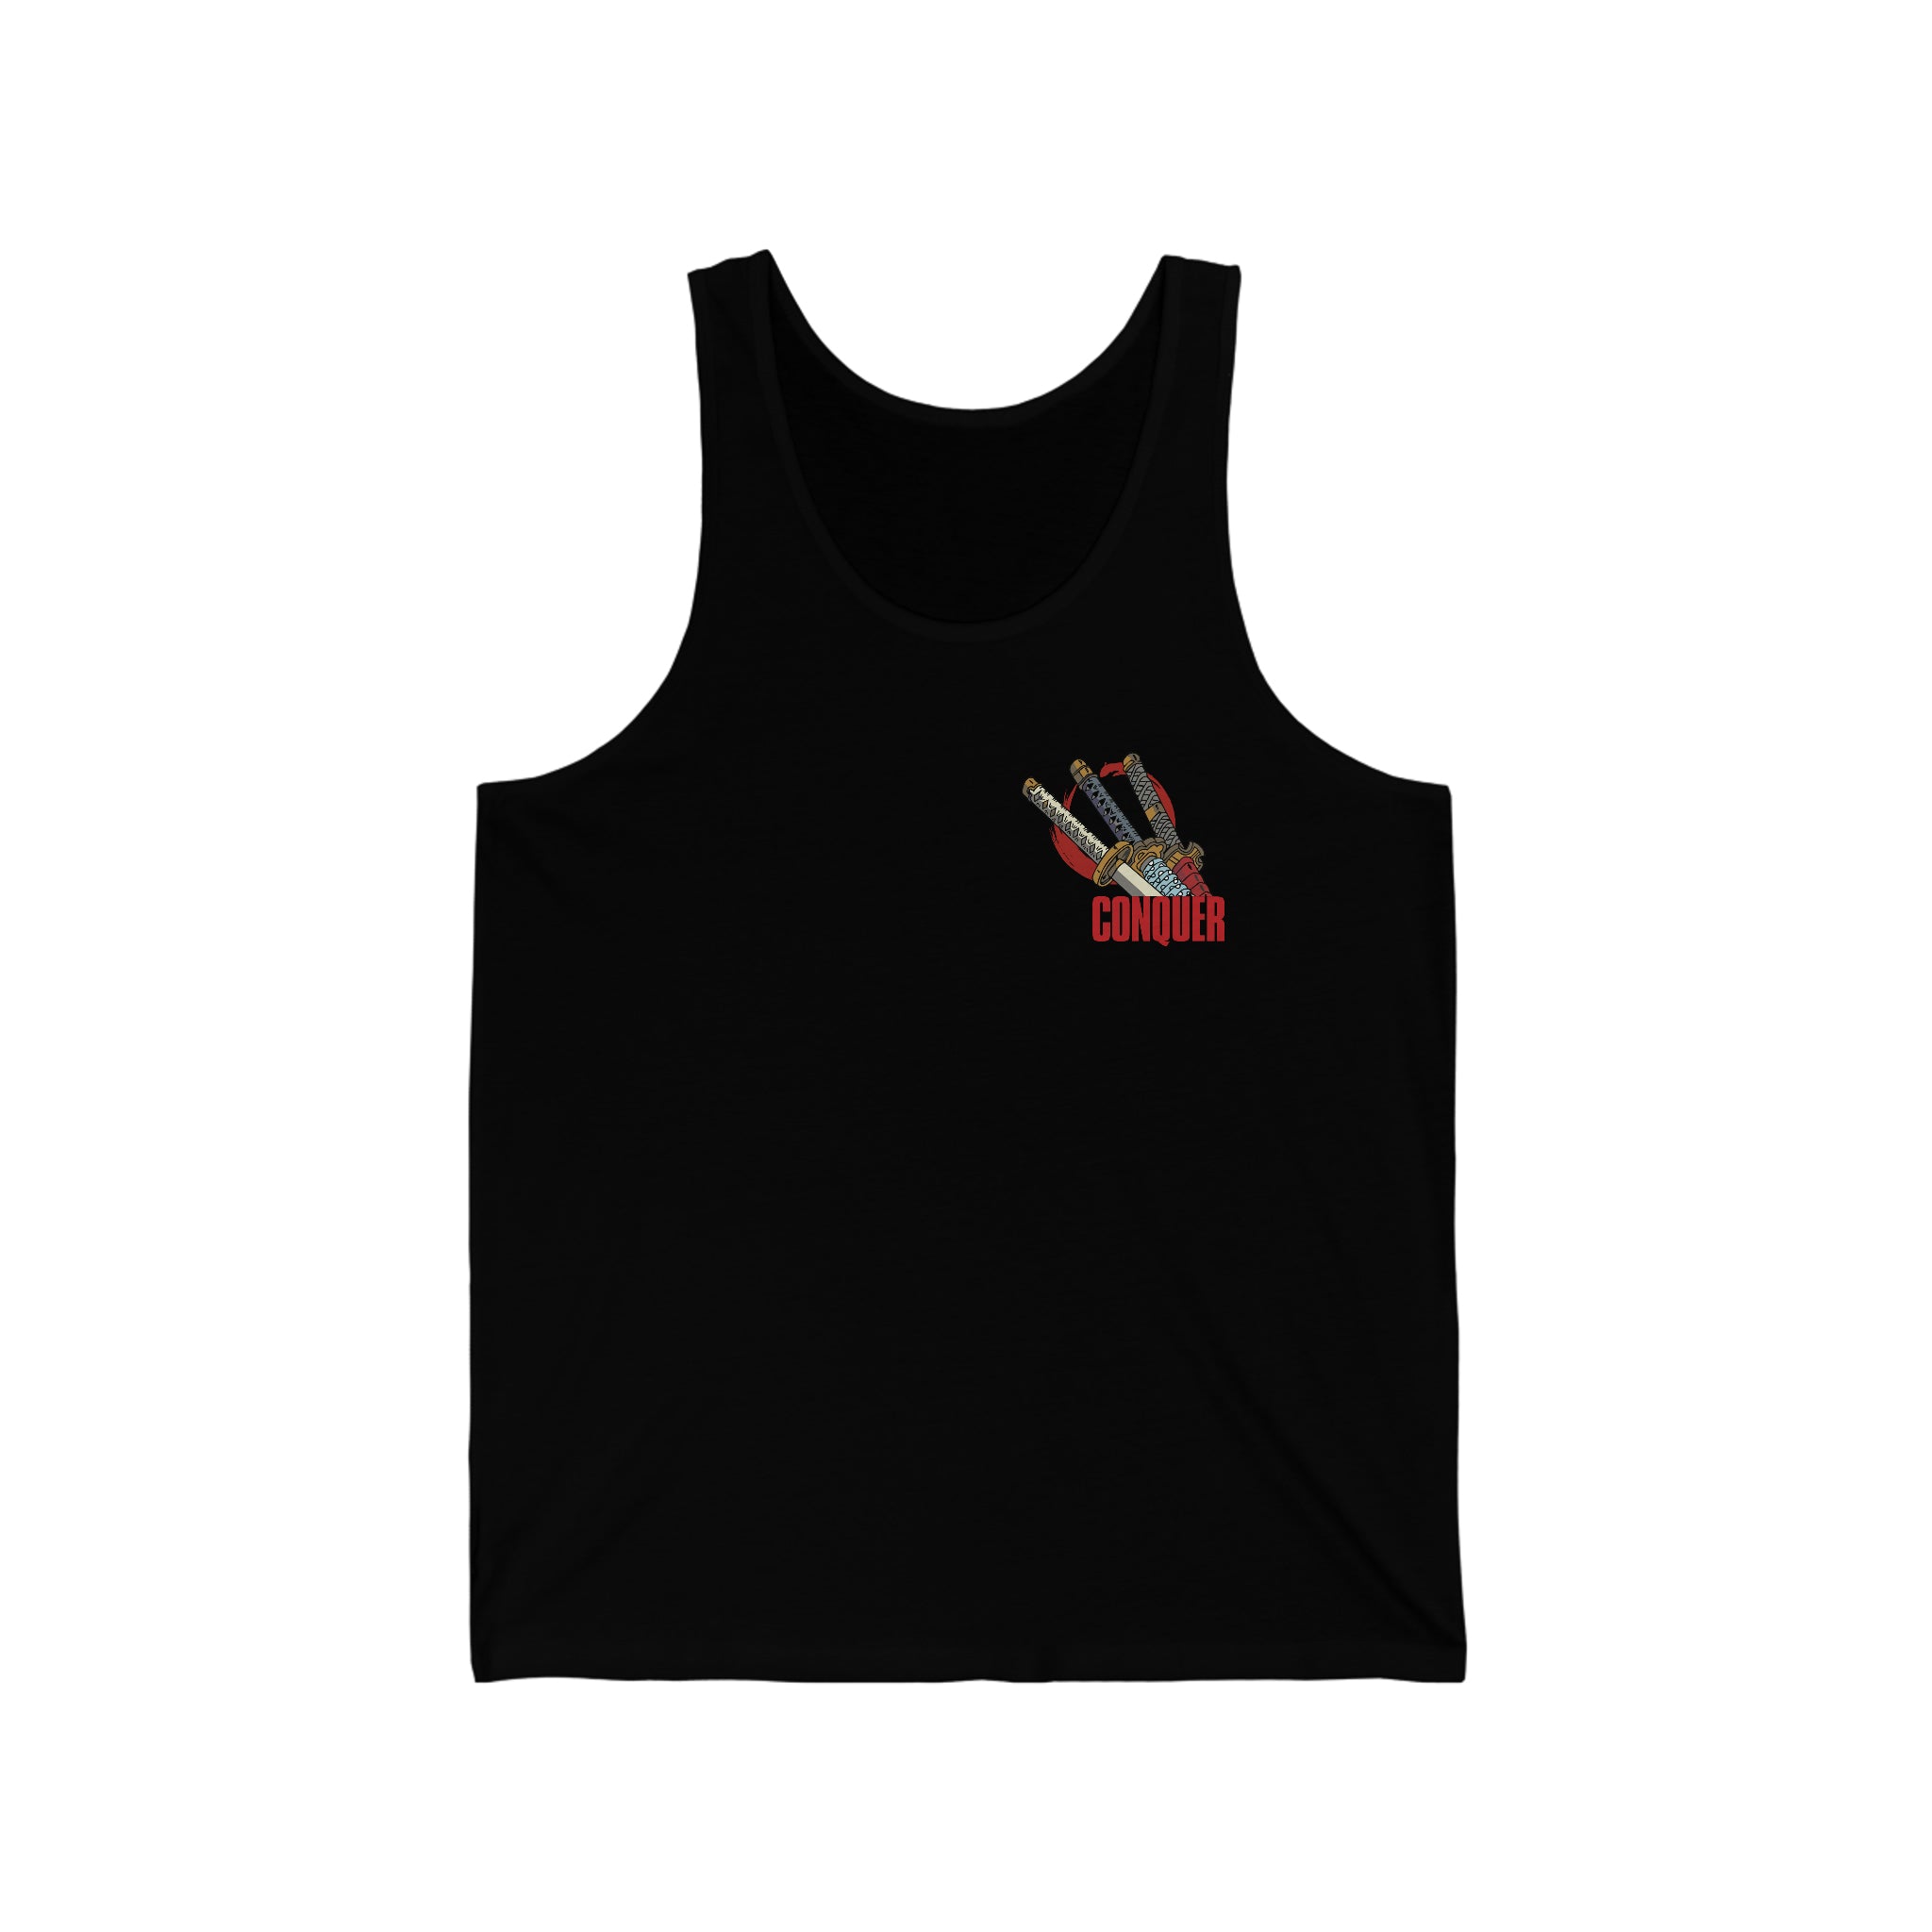 Conquer Your Fear Unisex Tank Top